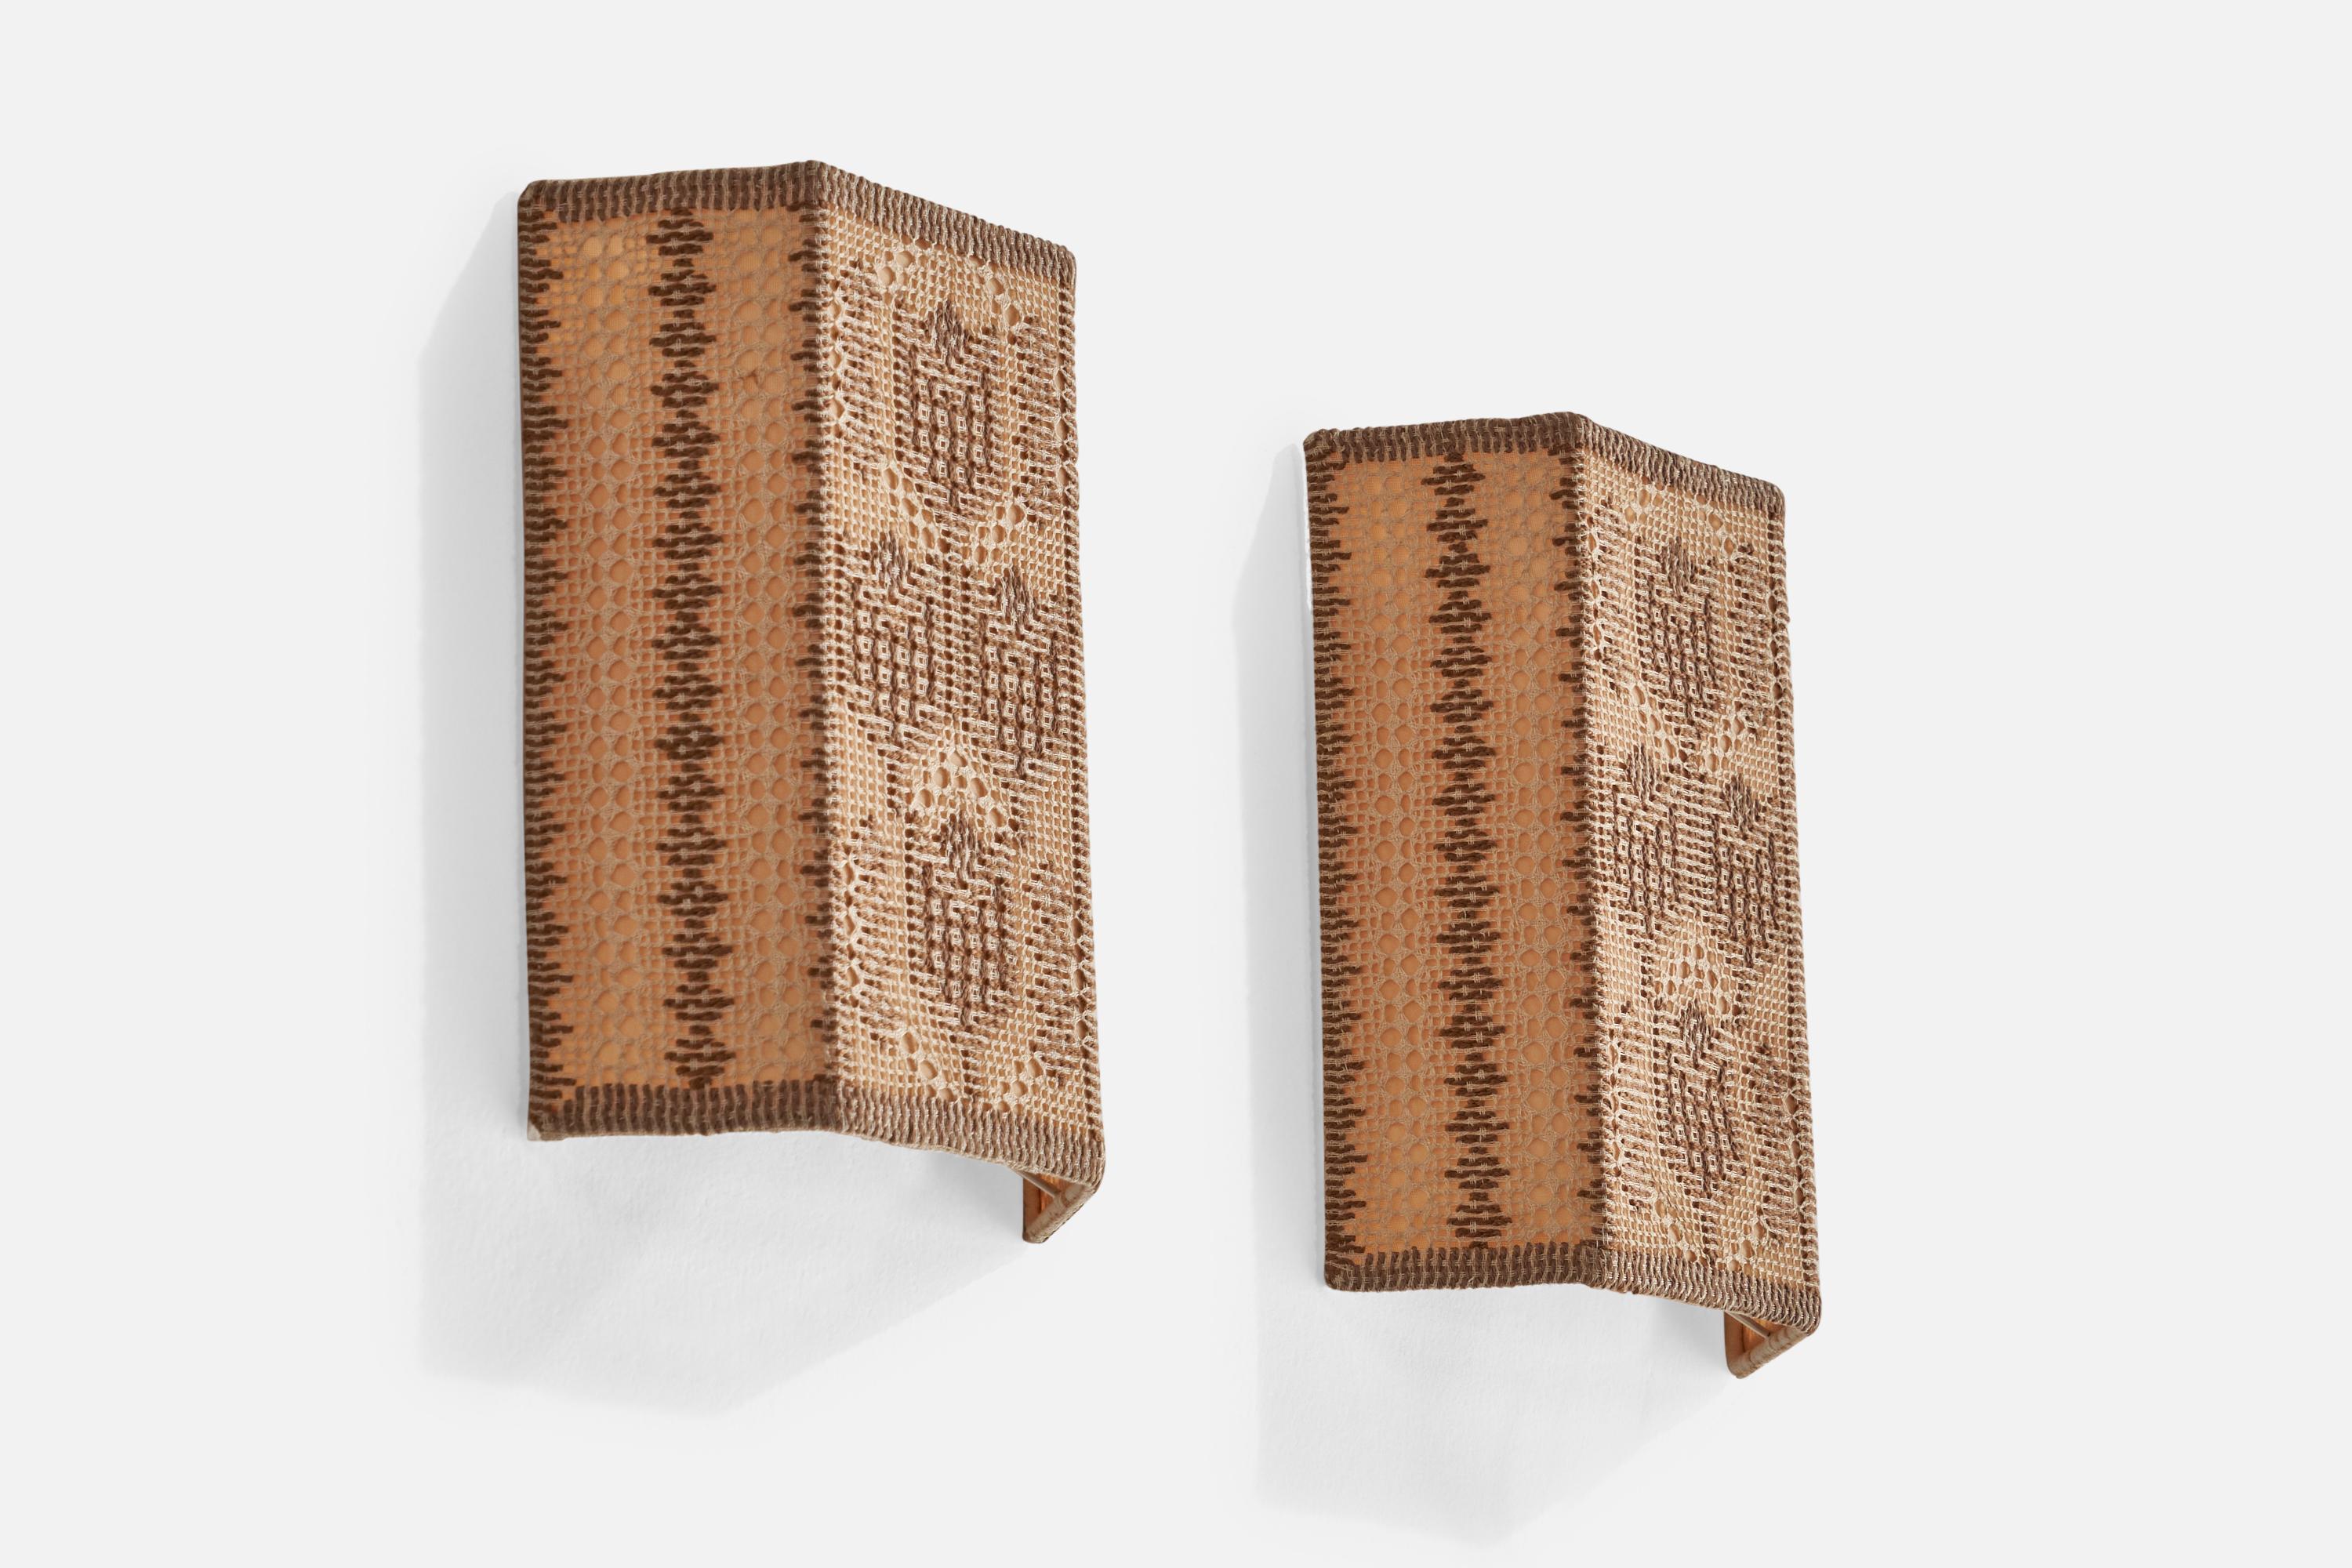 A pair of beige embroidery fabric wall lights designed and produced in Sweden, 1950s.

Overall Dimensions (inches): 10” H x 7.5” W x 2.5” D
Back Plate Dimensions (inches): N/A
Bulb Specifications: E-14 Bulb
Number of Sockets: 2
All lighting will be